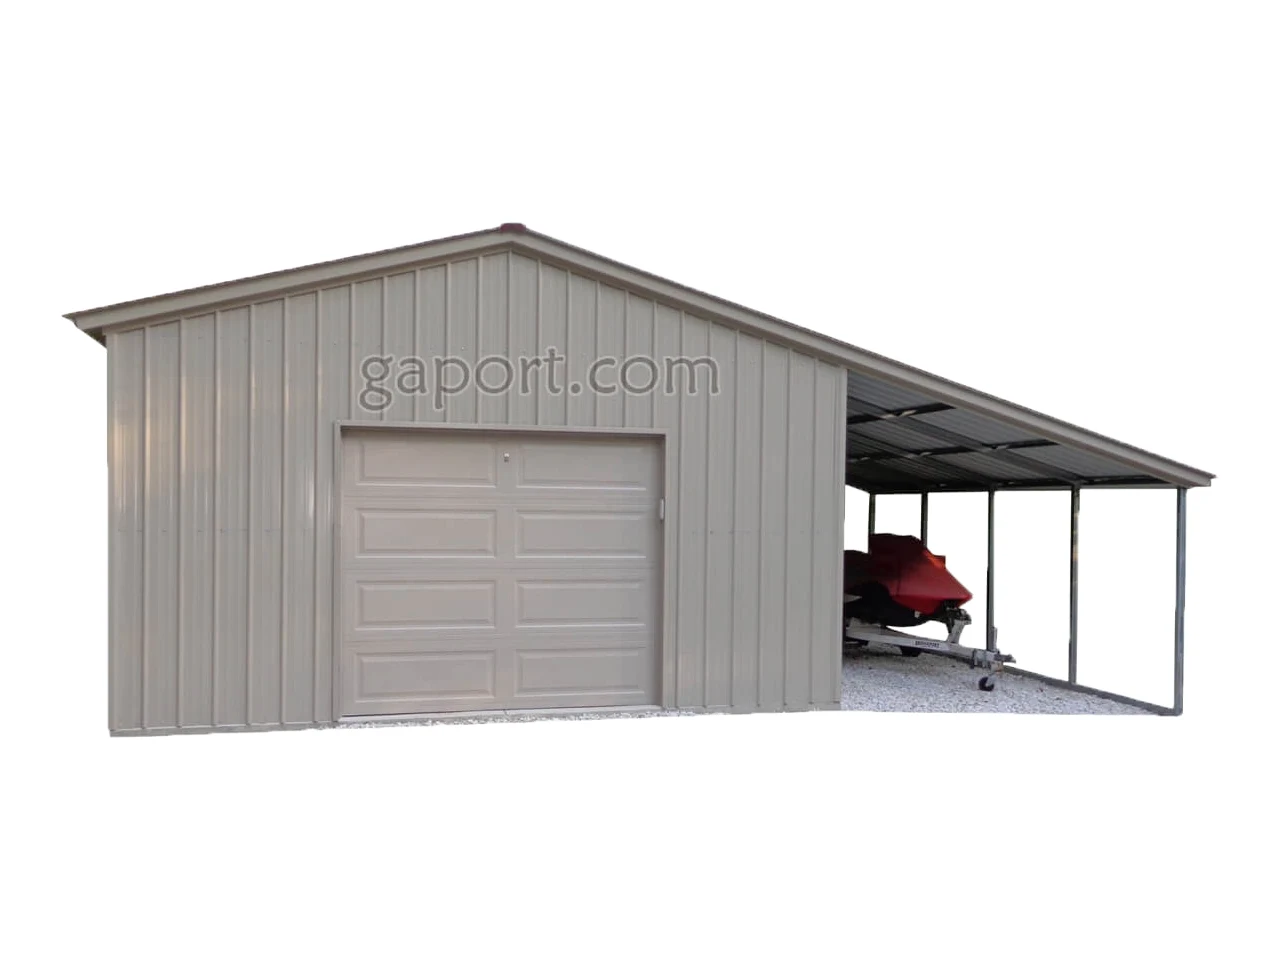 attractive metal garage with attached lean-too on the side for an added covered area